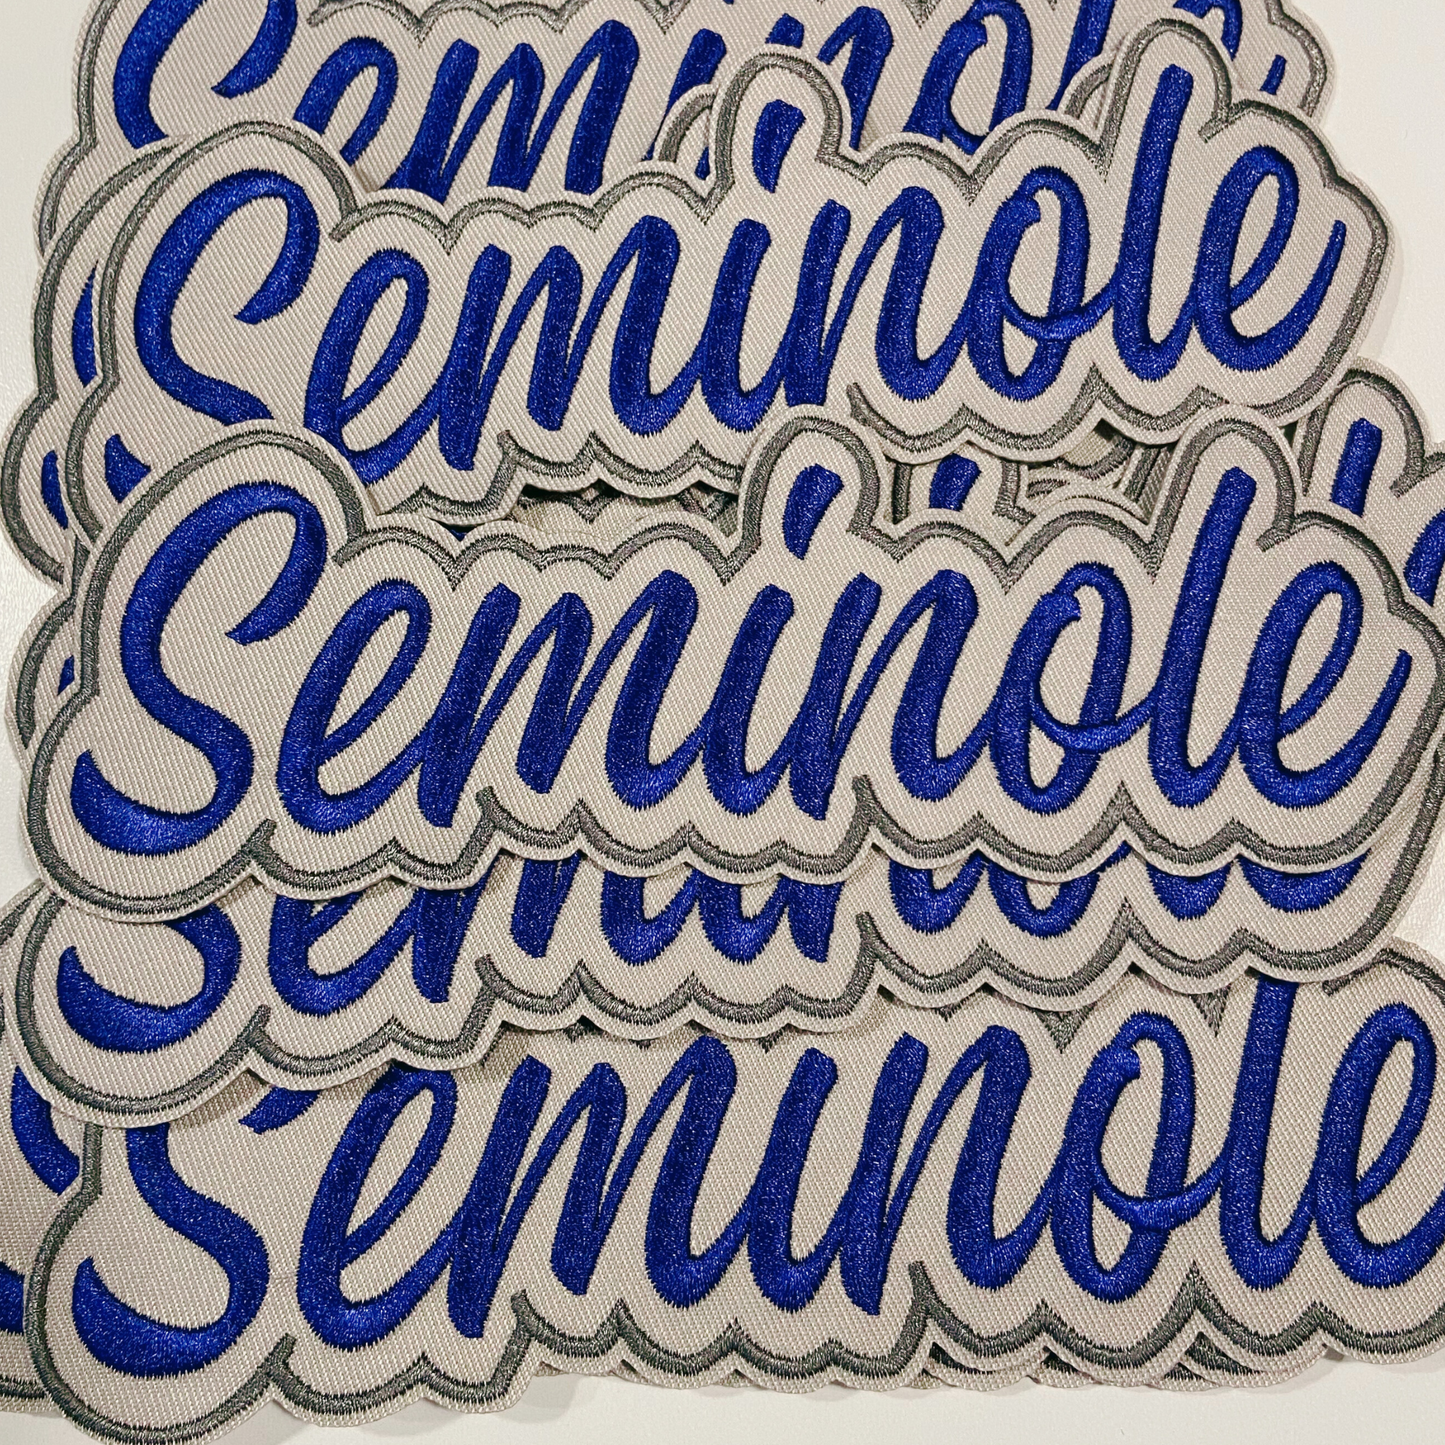 7"  Seminole Navy Blue & Gray -  Embroidered  Patch